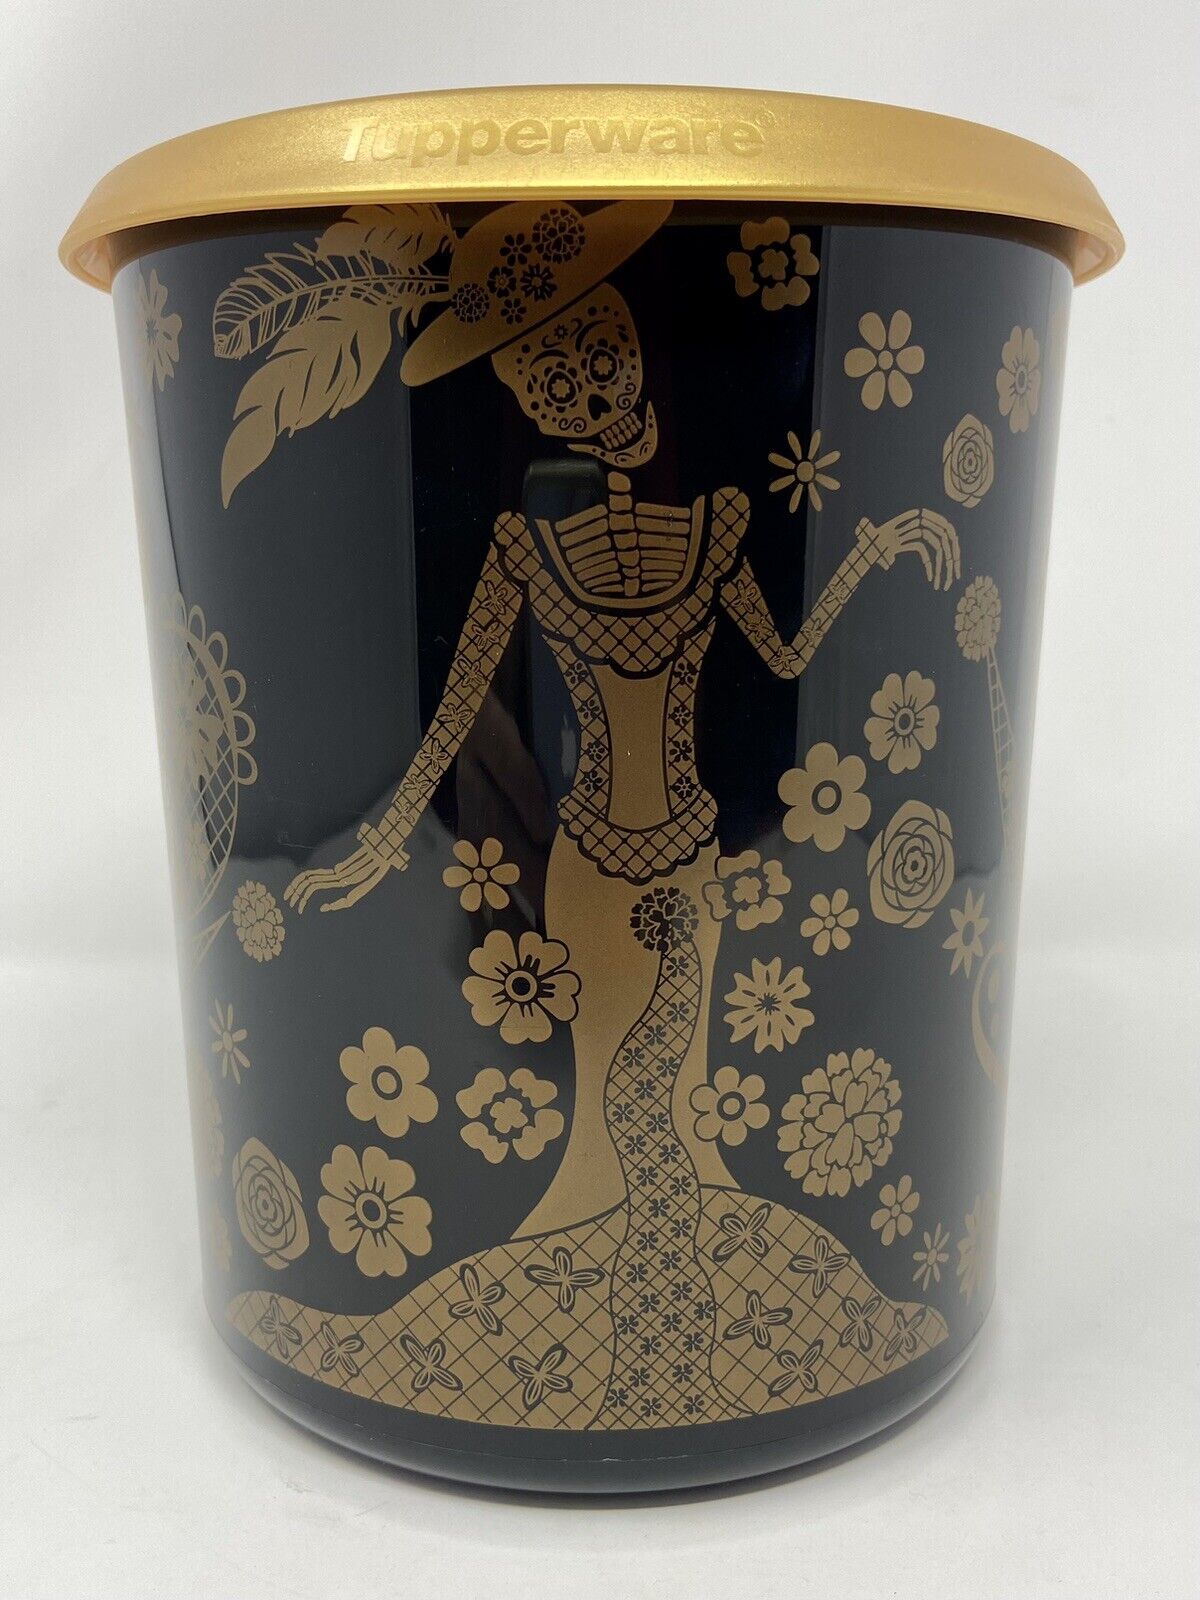 FREE SHIPPING Tupperware Dia De Los Muertos One Touch Canister 12-cup / 2.8L New